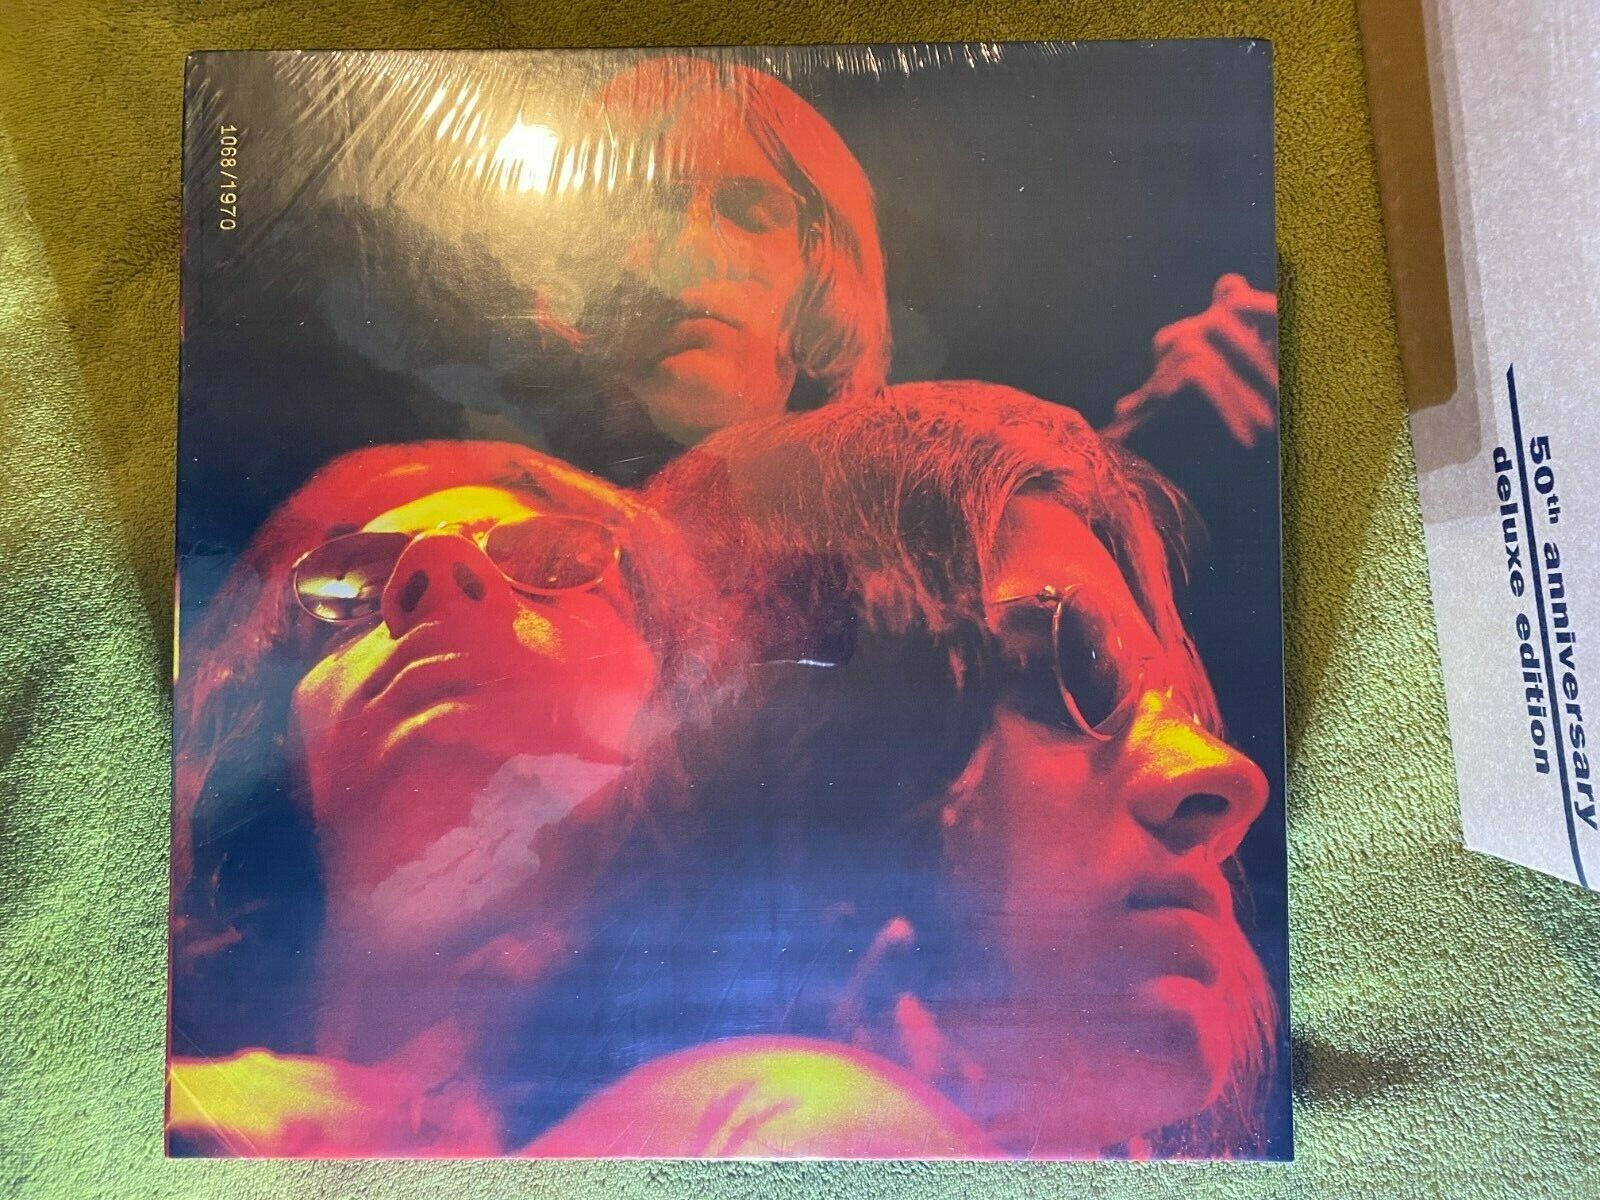 popsike.com - THE STOOGES - Fun House 50th Anniversary - Vinyl LPs